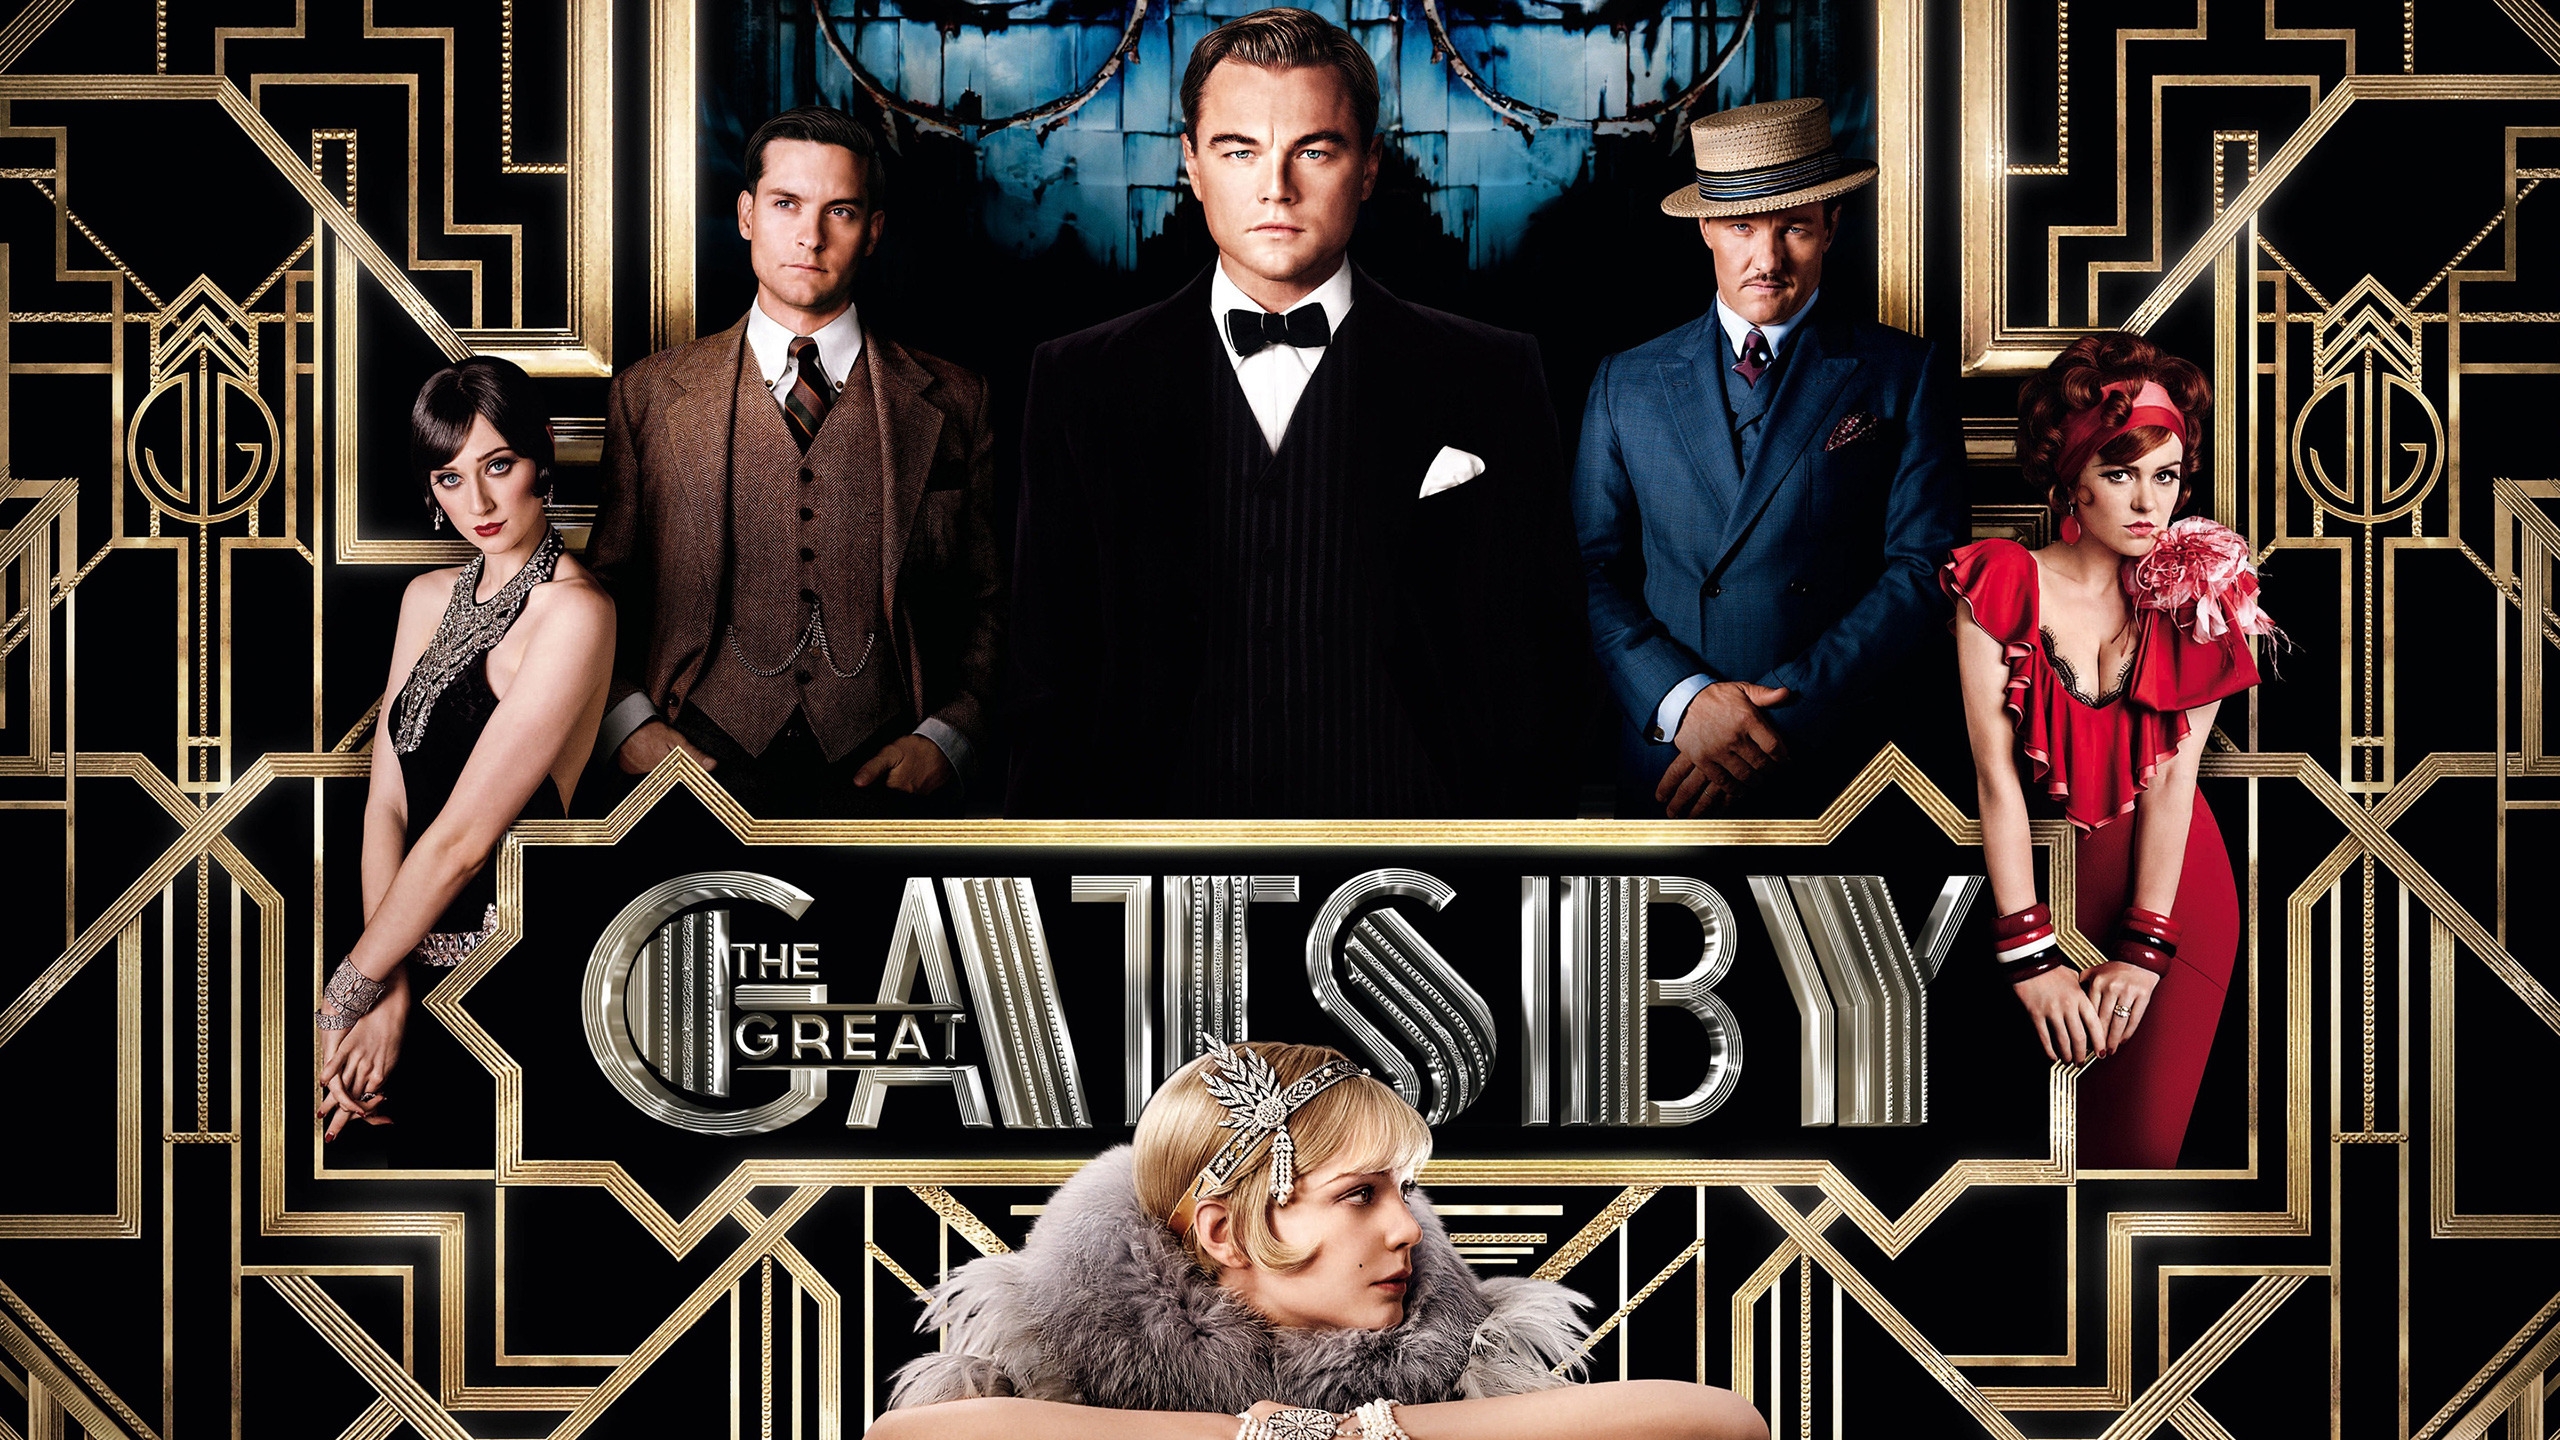 The Great Gatsby Movie for 2560x1440 HDTV resolution